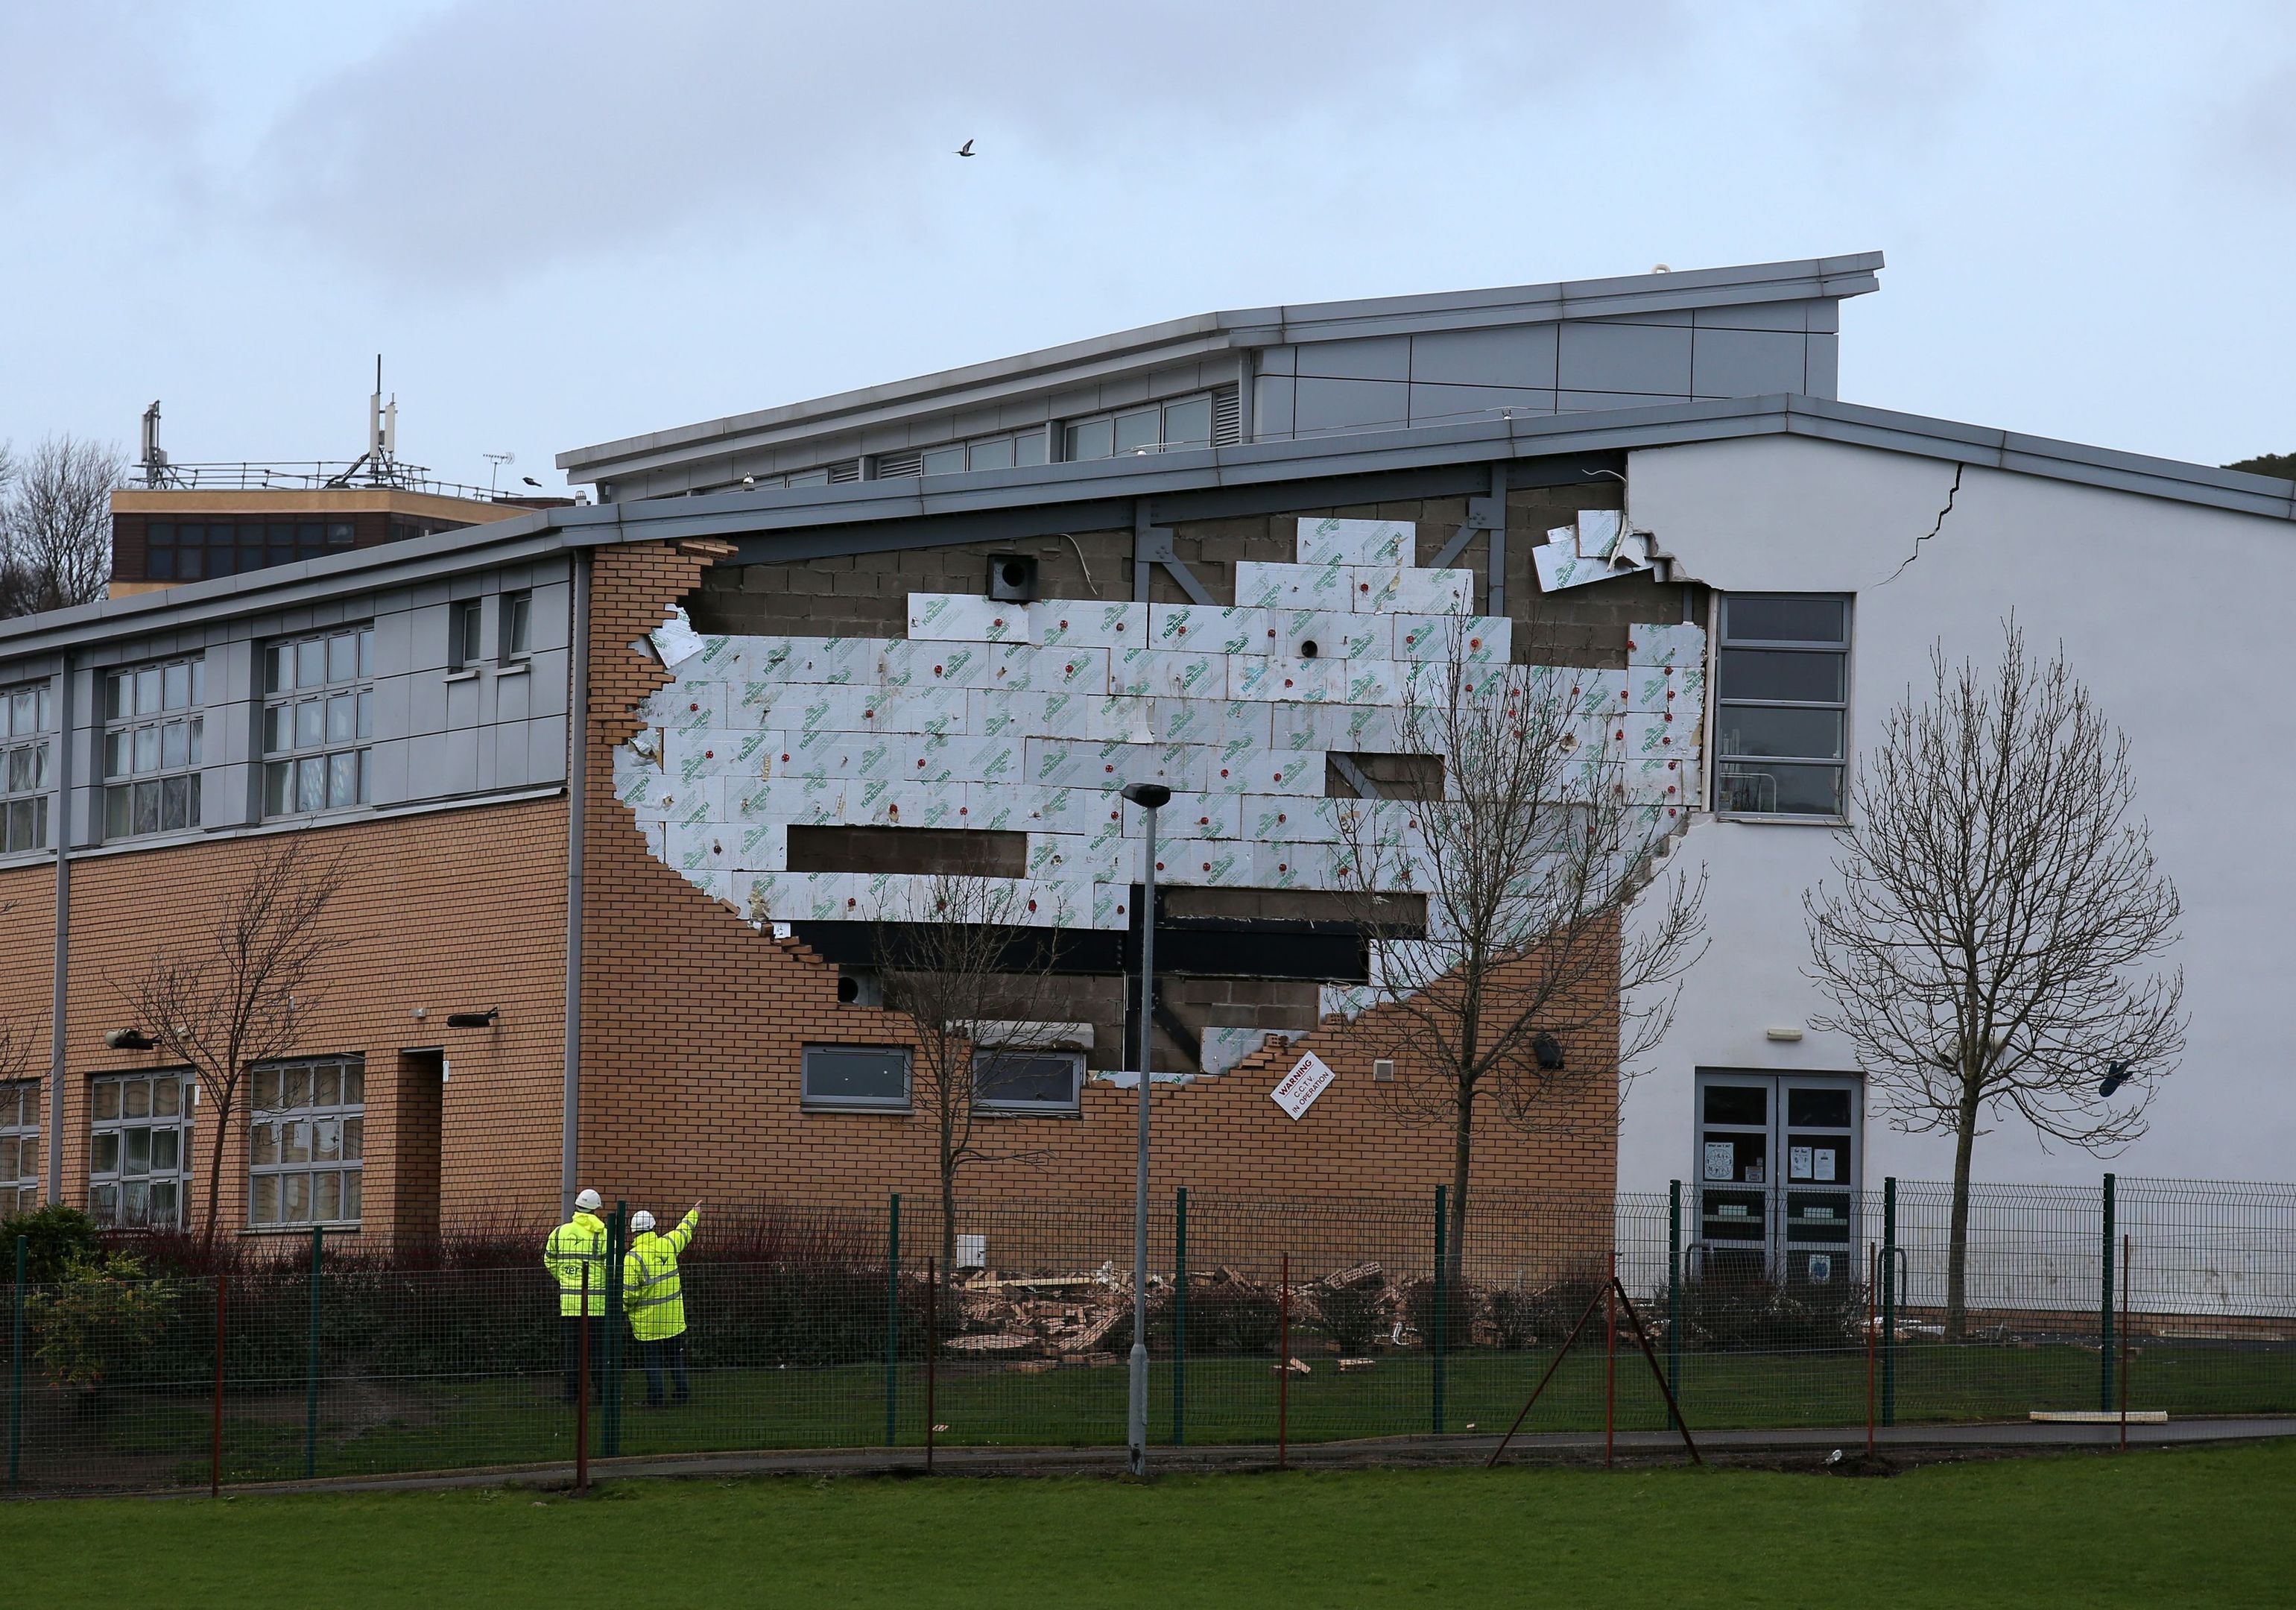 A collapsed wall at Oxgangs Primary School in Edinburgh